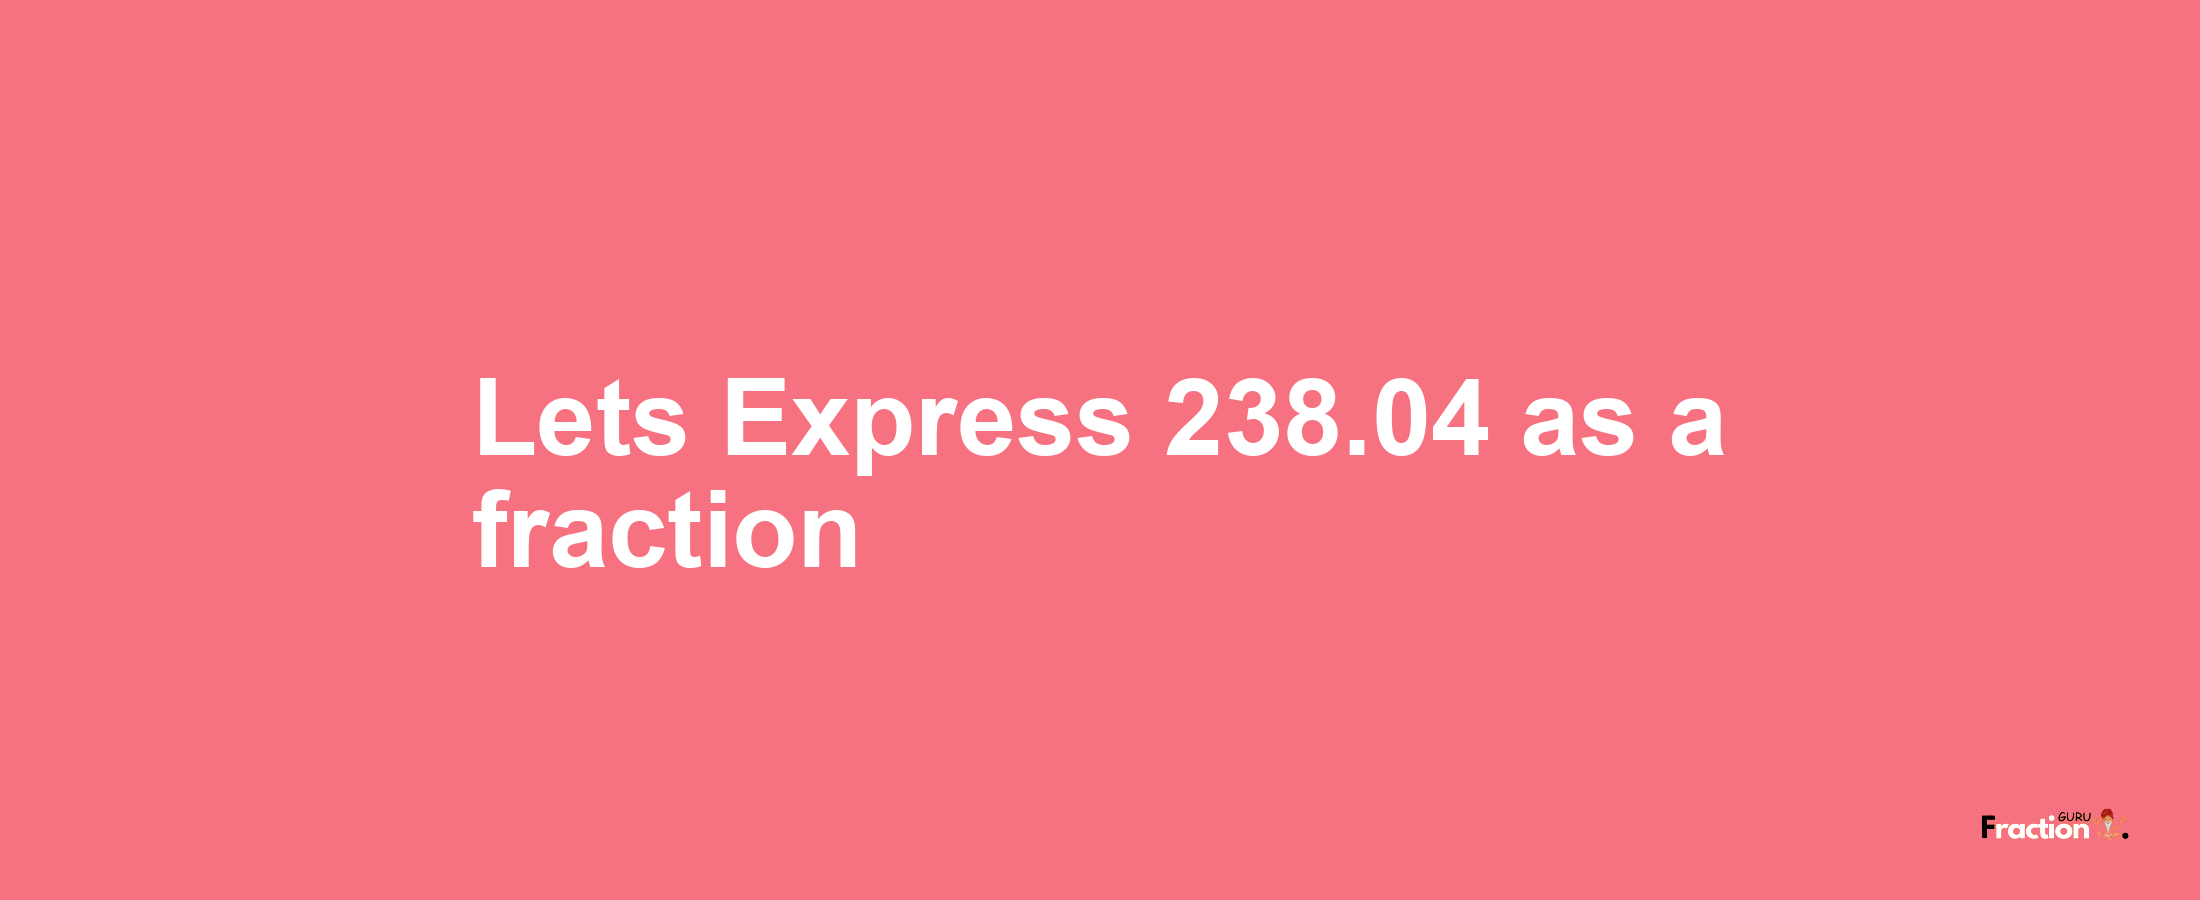 Lets Express 238.04 as afraction